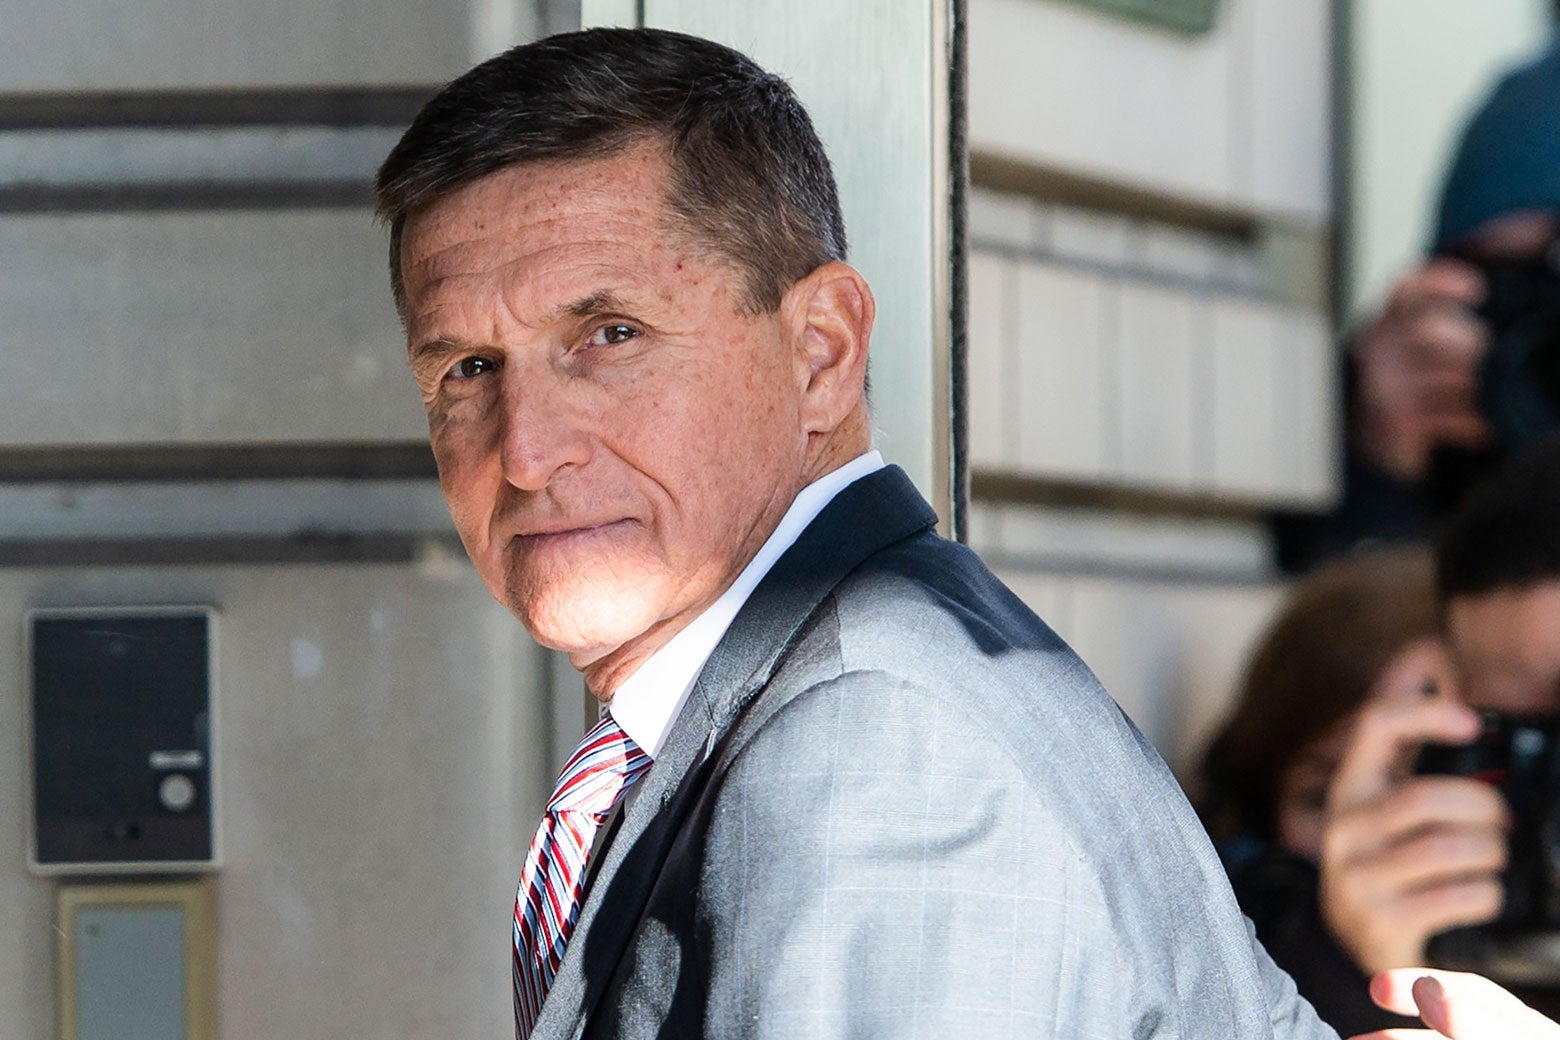 Outside the court building, Flynn turns to the camera, with more photographers in the background